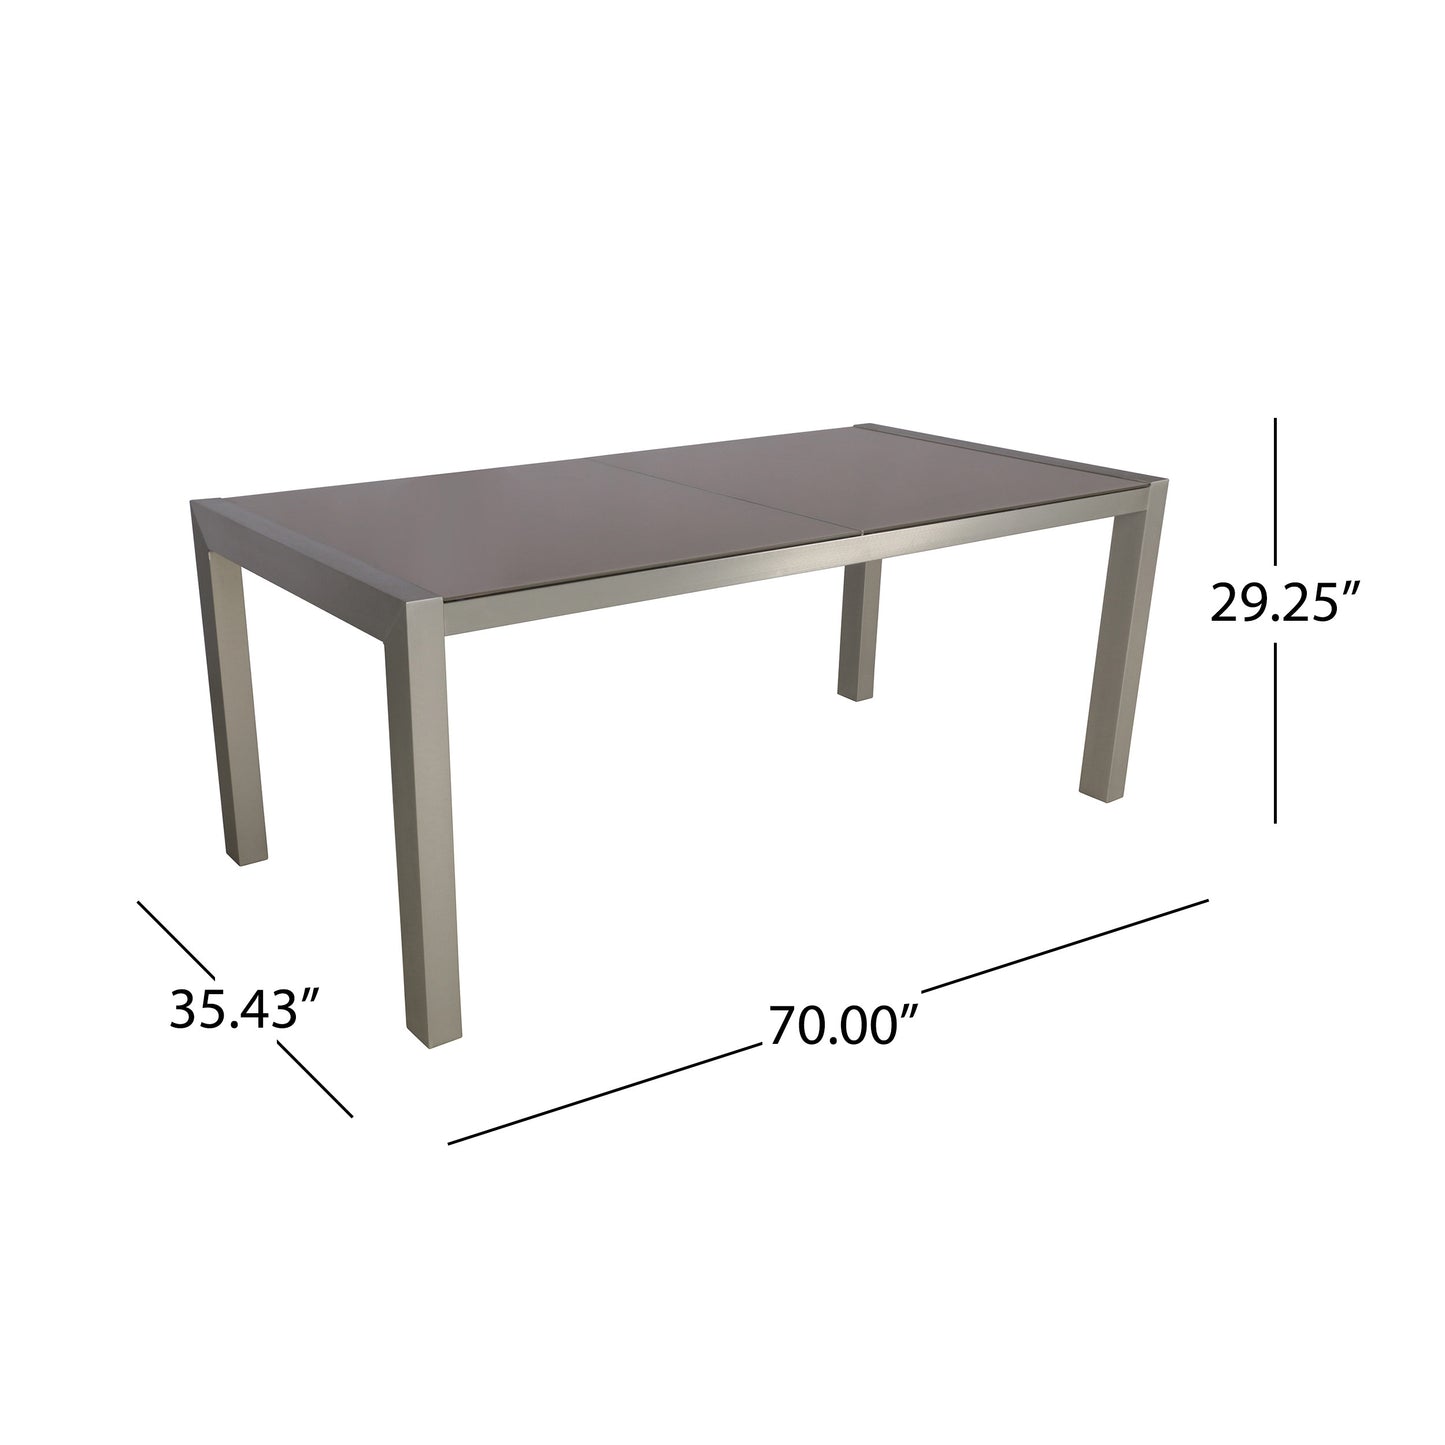 Eli Outdoor Tempered Glass Dining Table with Aluminum Frame